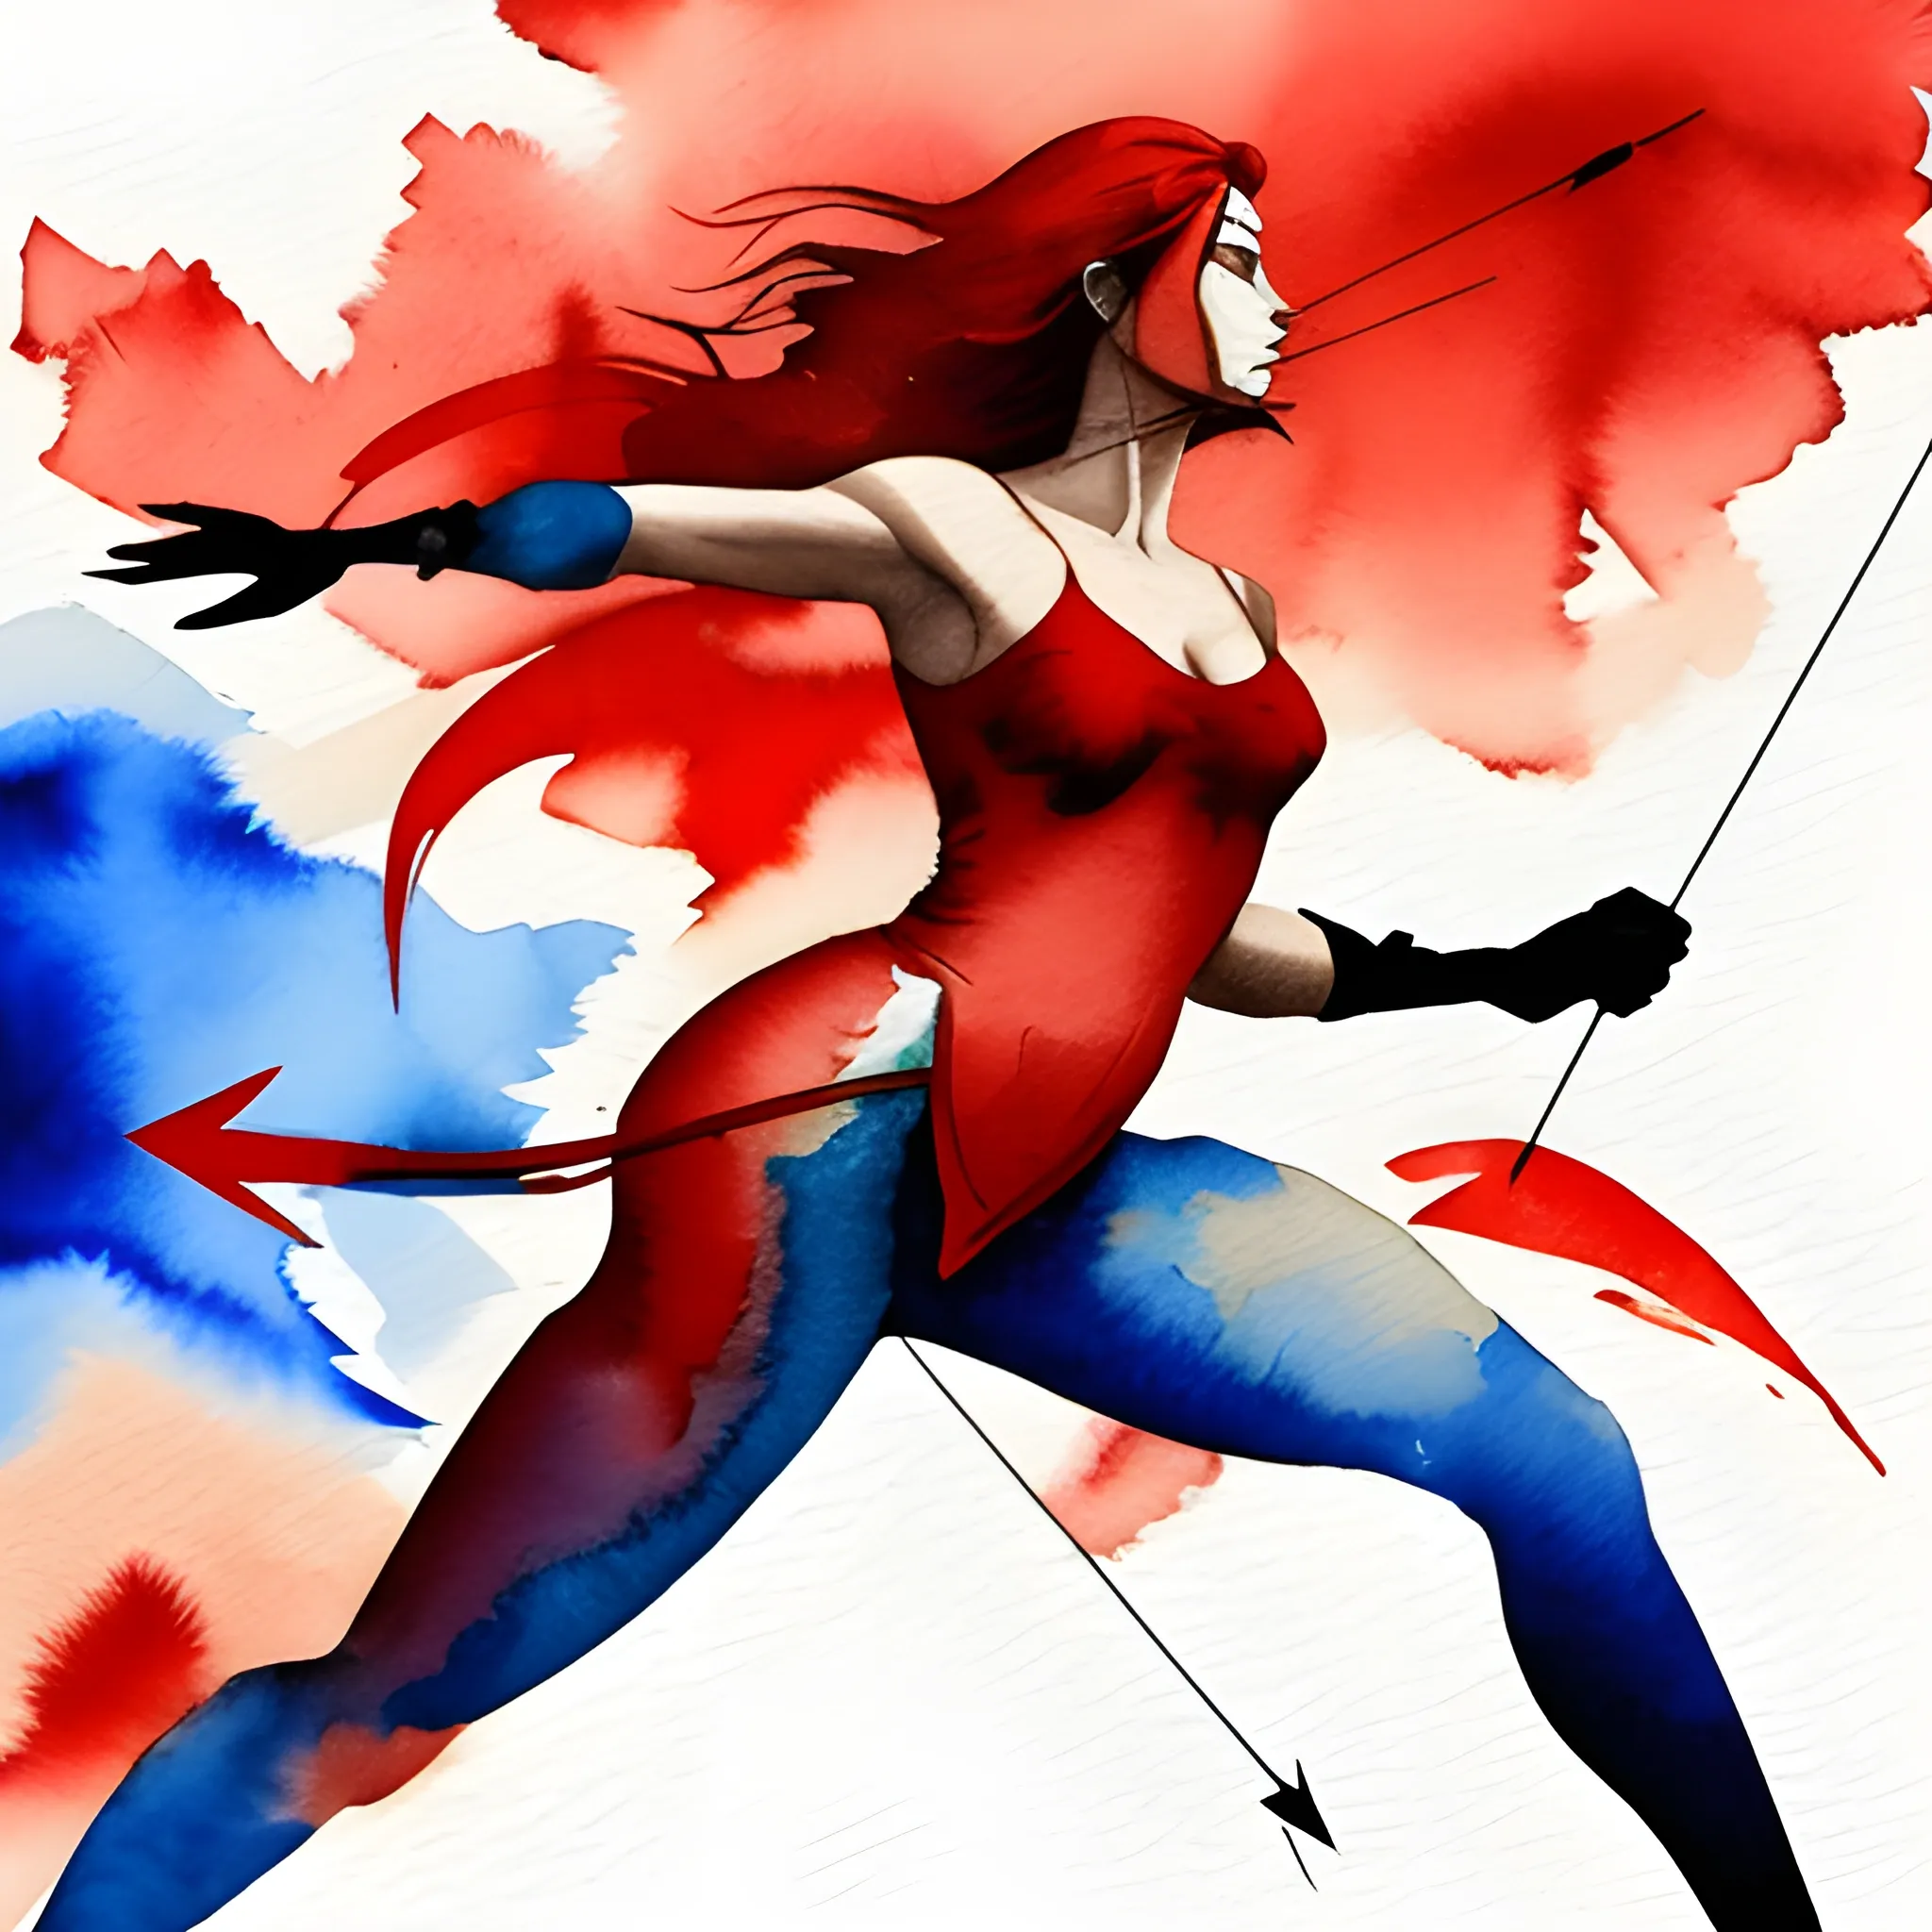 Create a watercolor scene depicting a woman on the horizon striking a dynamic pose while gracefully dodging numerous arrows falling from the sky. Emphasize the color red to make a visual impact.